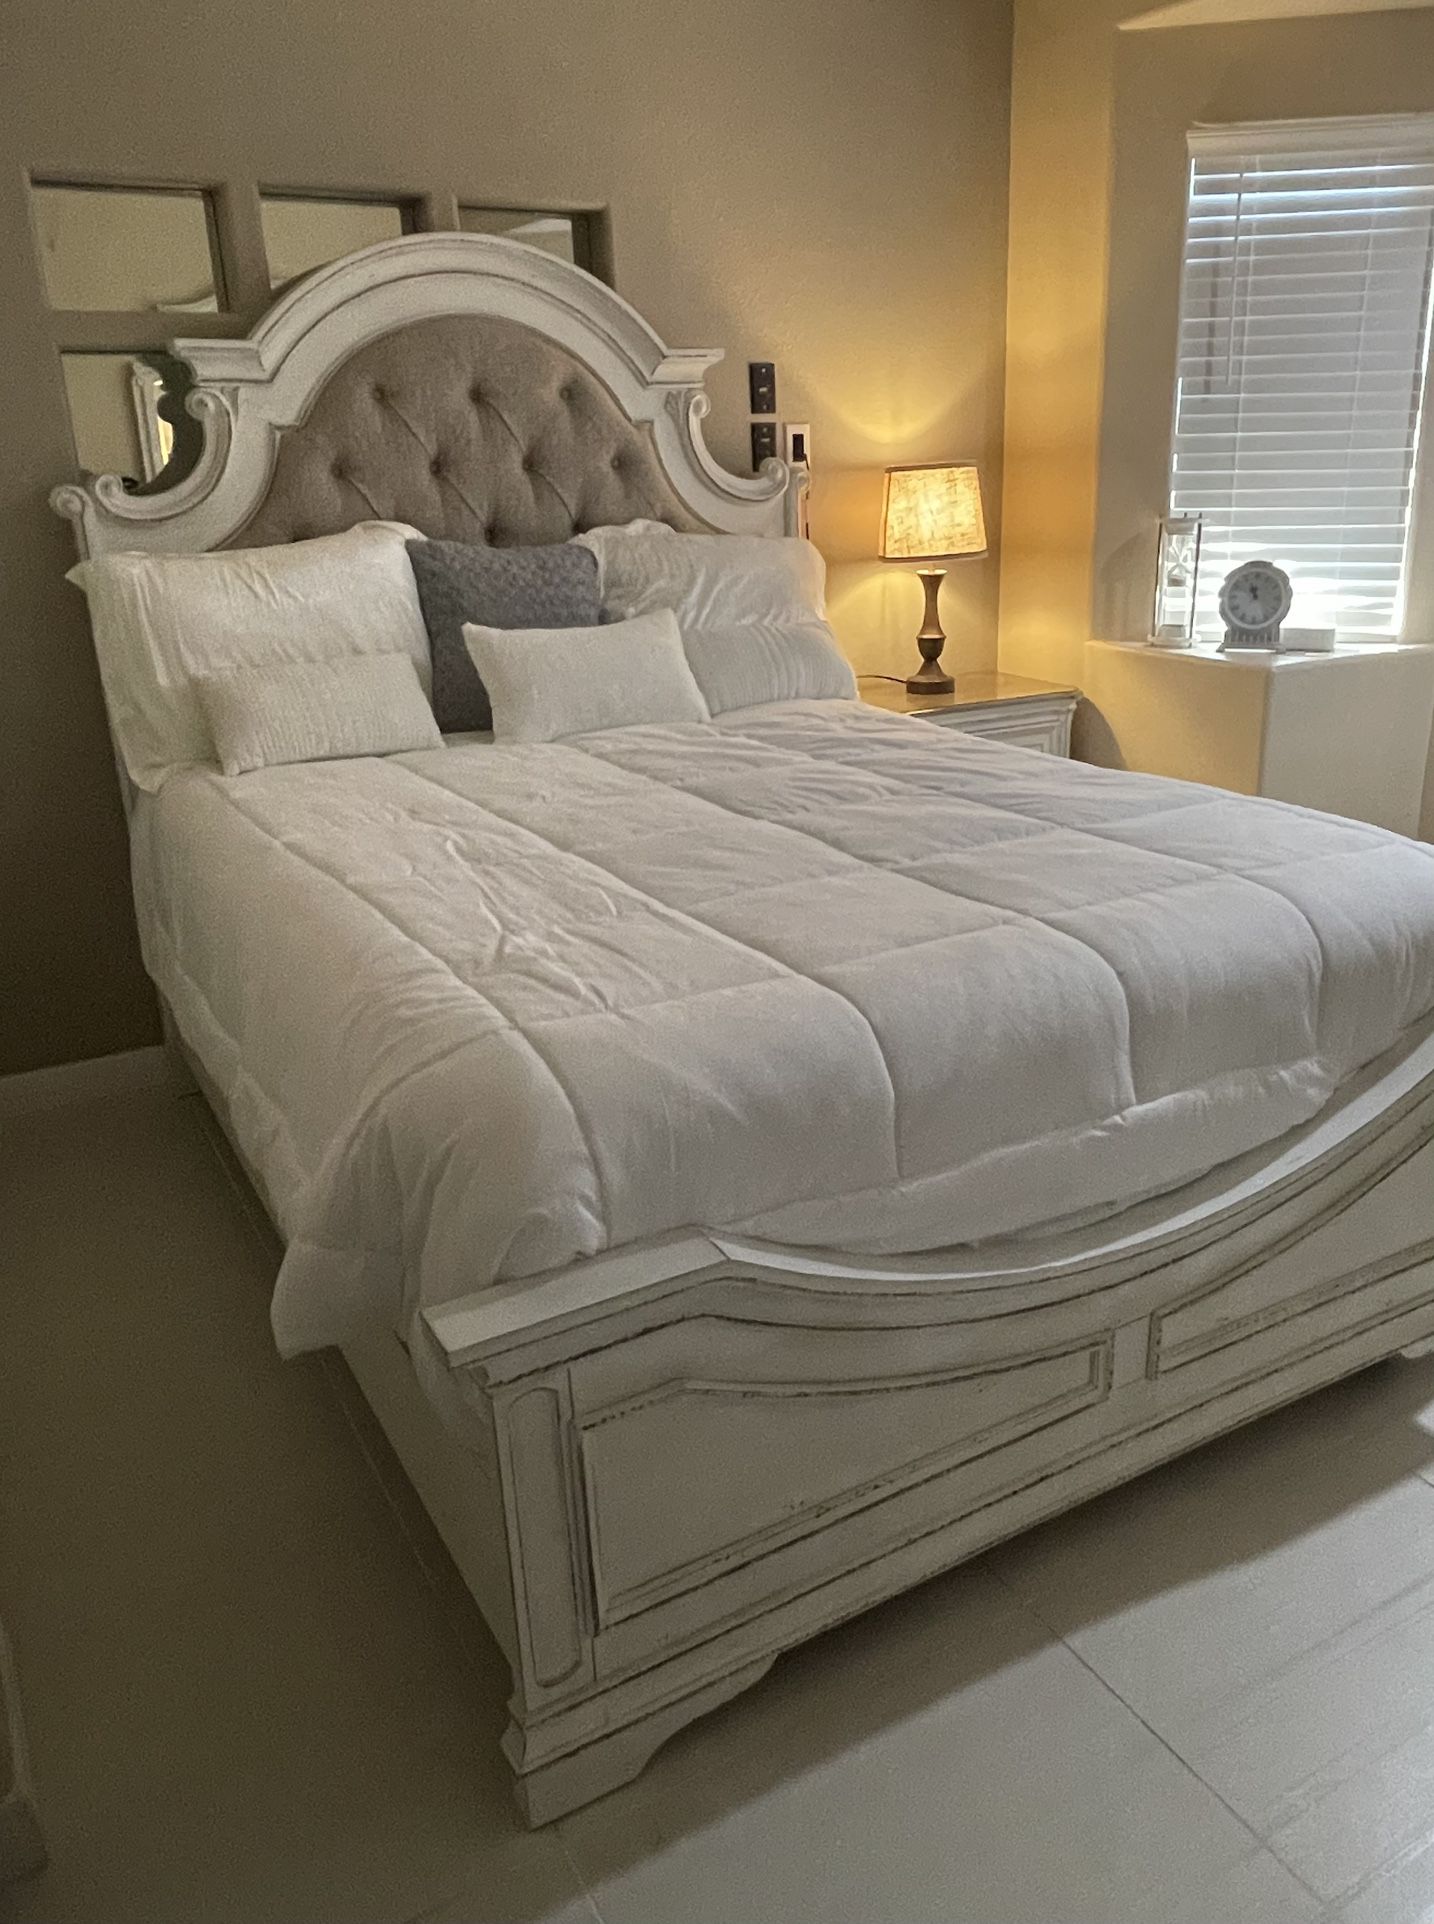 Queen Size Bedroom Set With 2 Night Stands And Mattress Included 